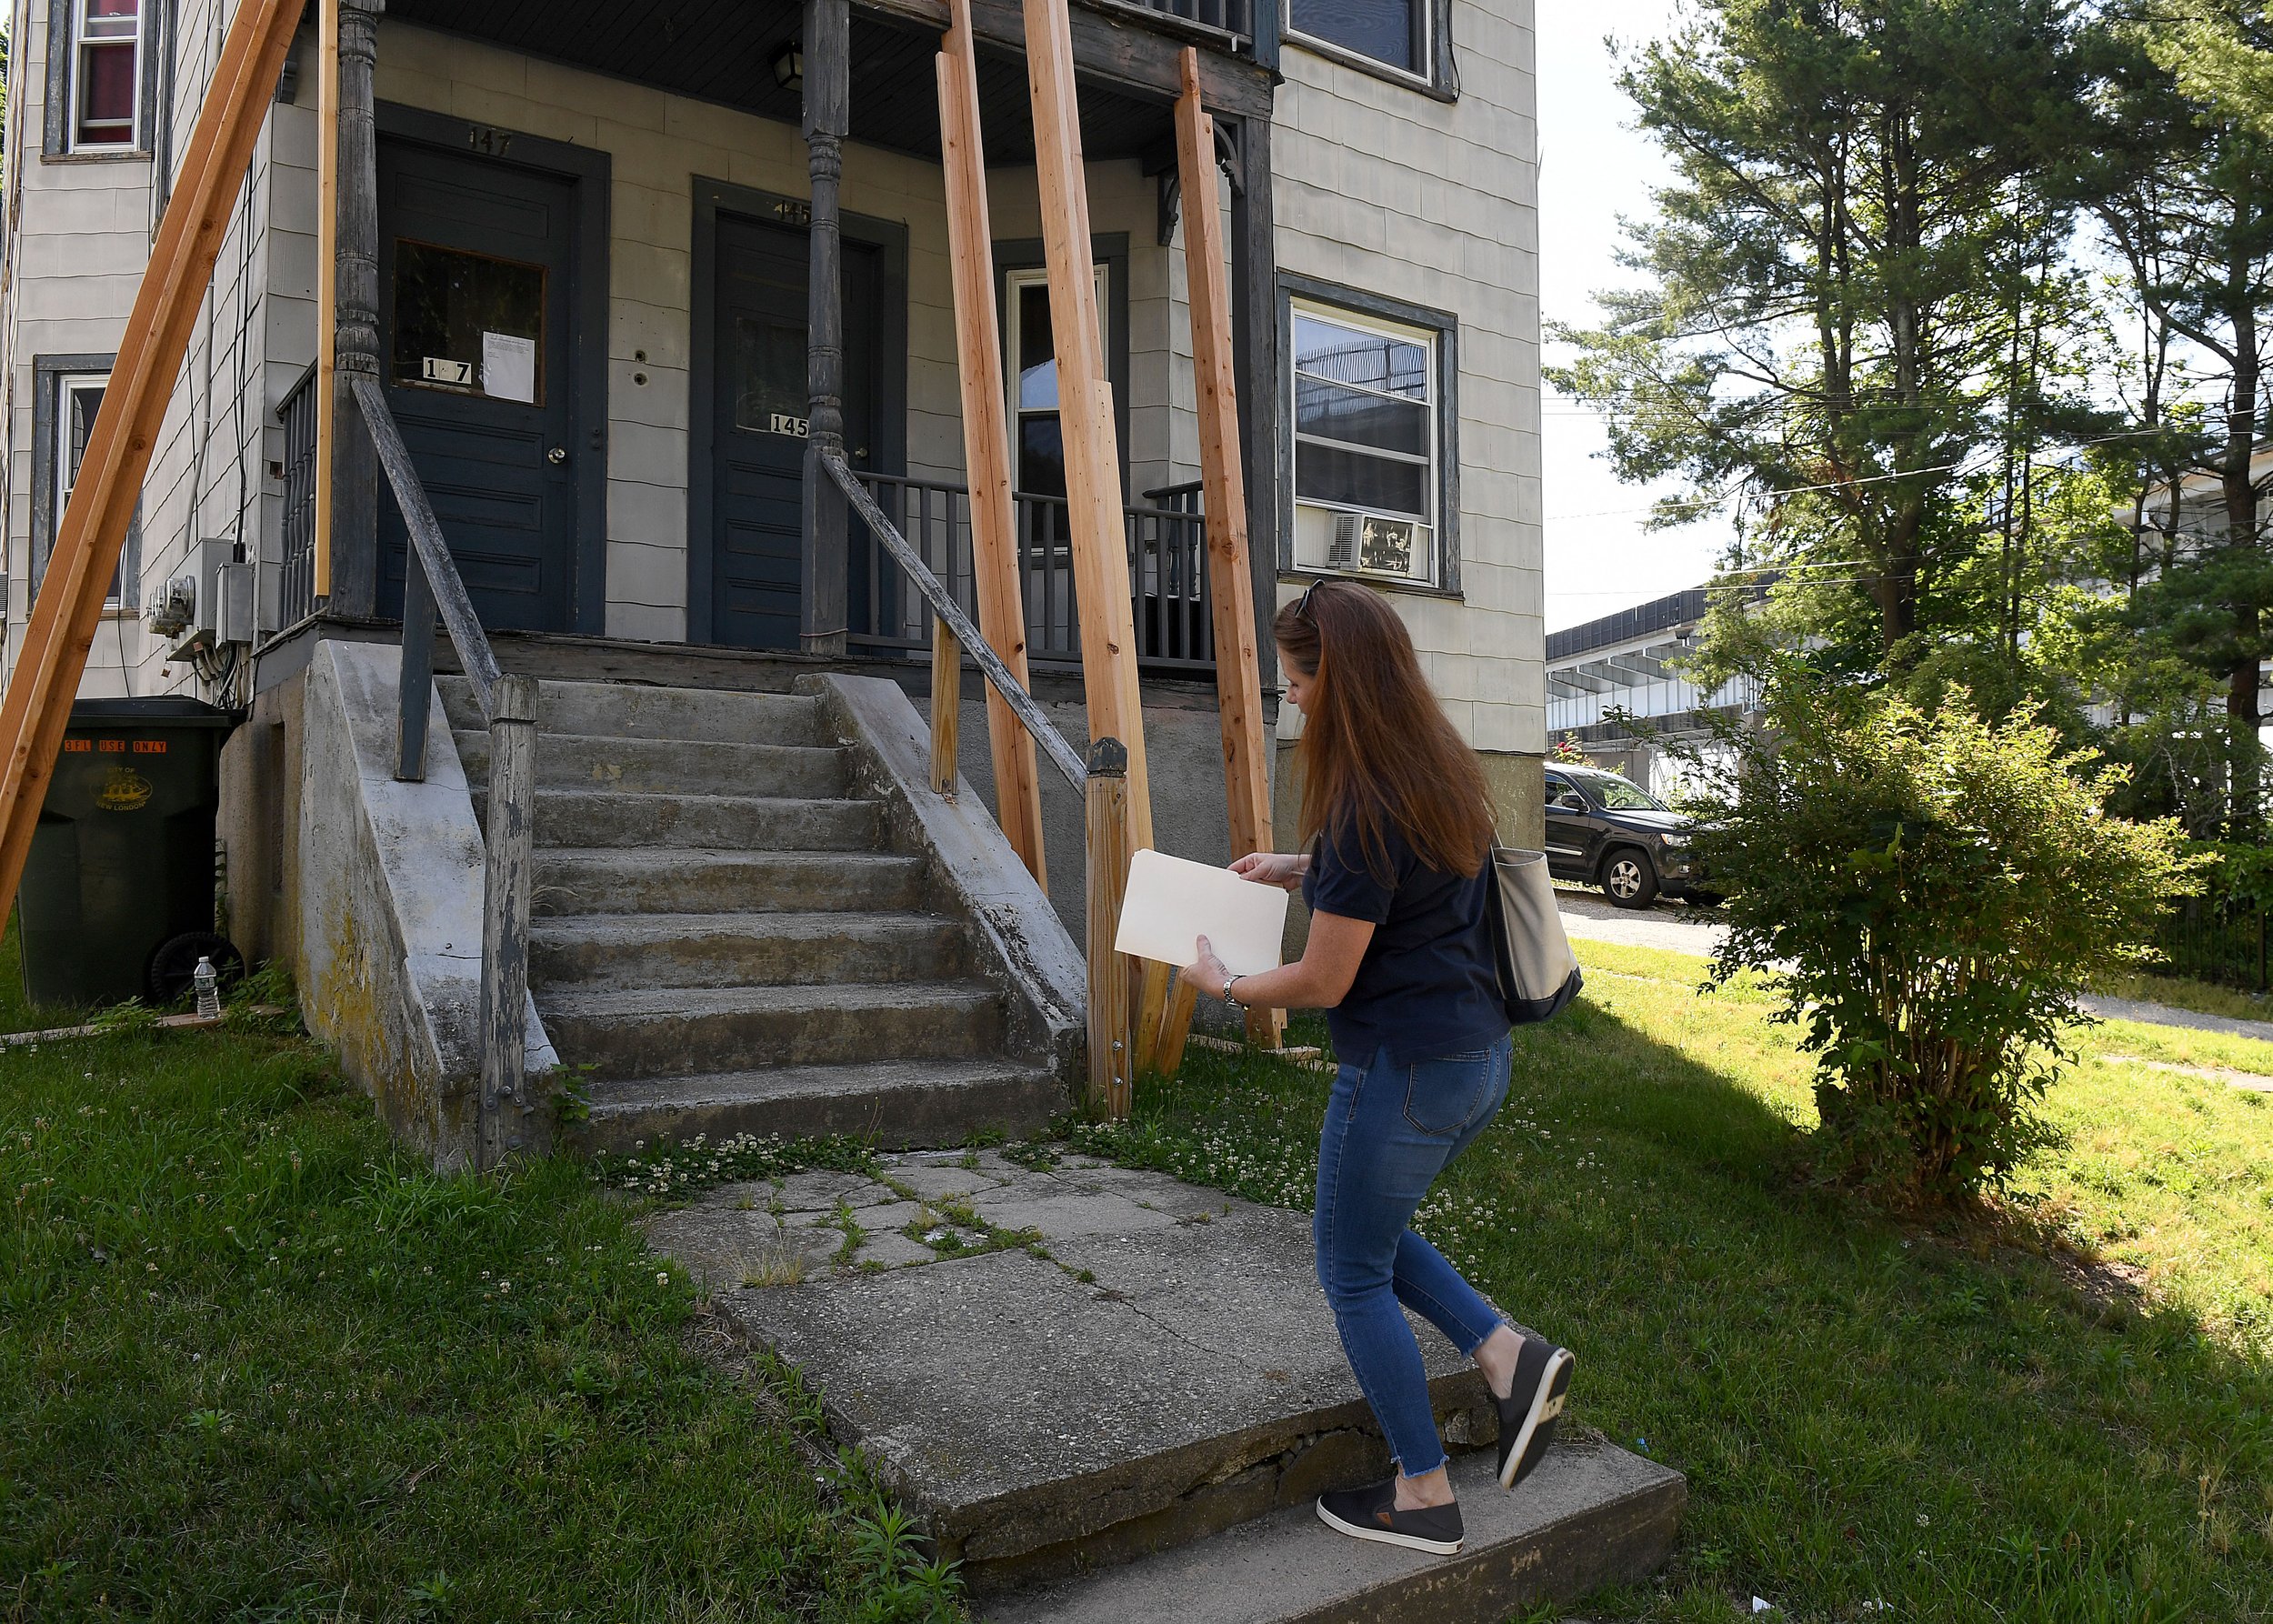  Cheryl Haase, Environmental Technician with the Ledge Light Health District, walks up to a home for a mold inspection on Crystal Avenue in New London Thursday, June 30, 2022. (Sarah Gordon/The Day)  